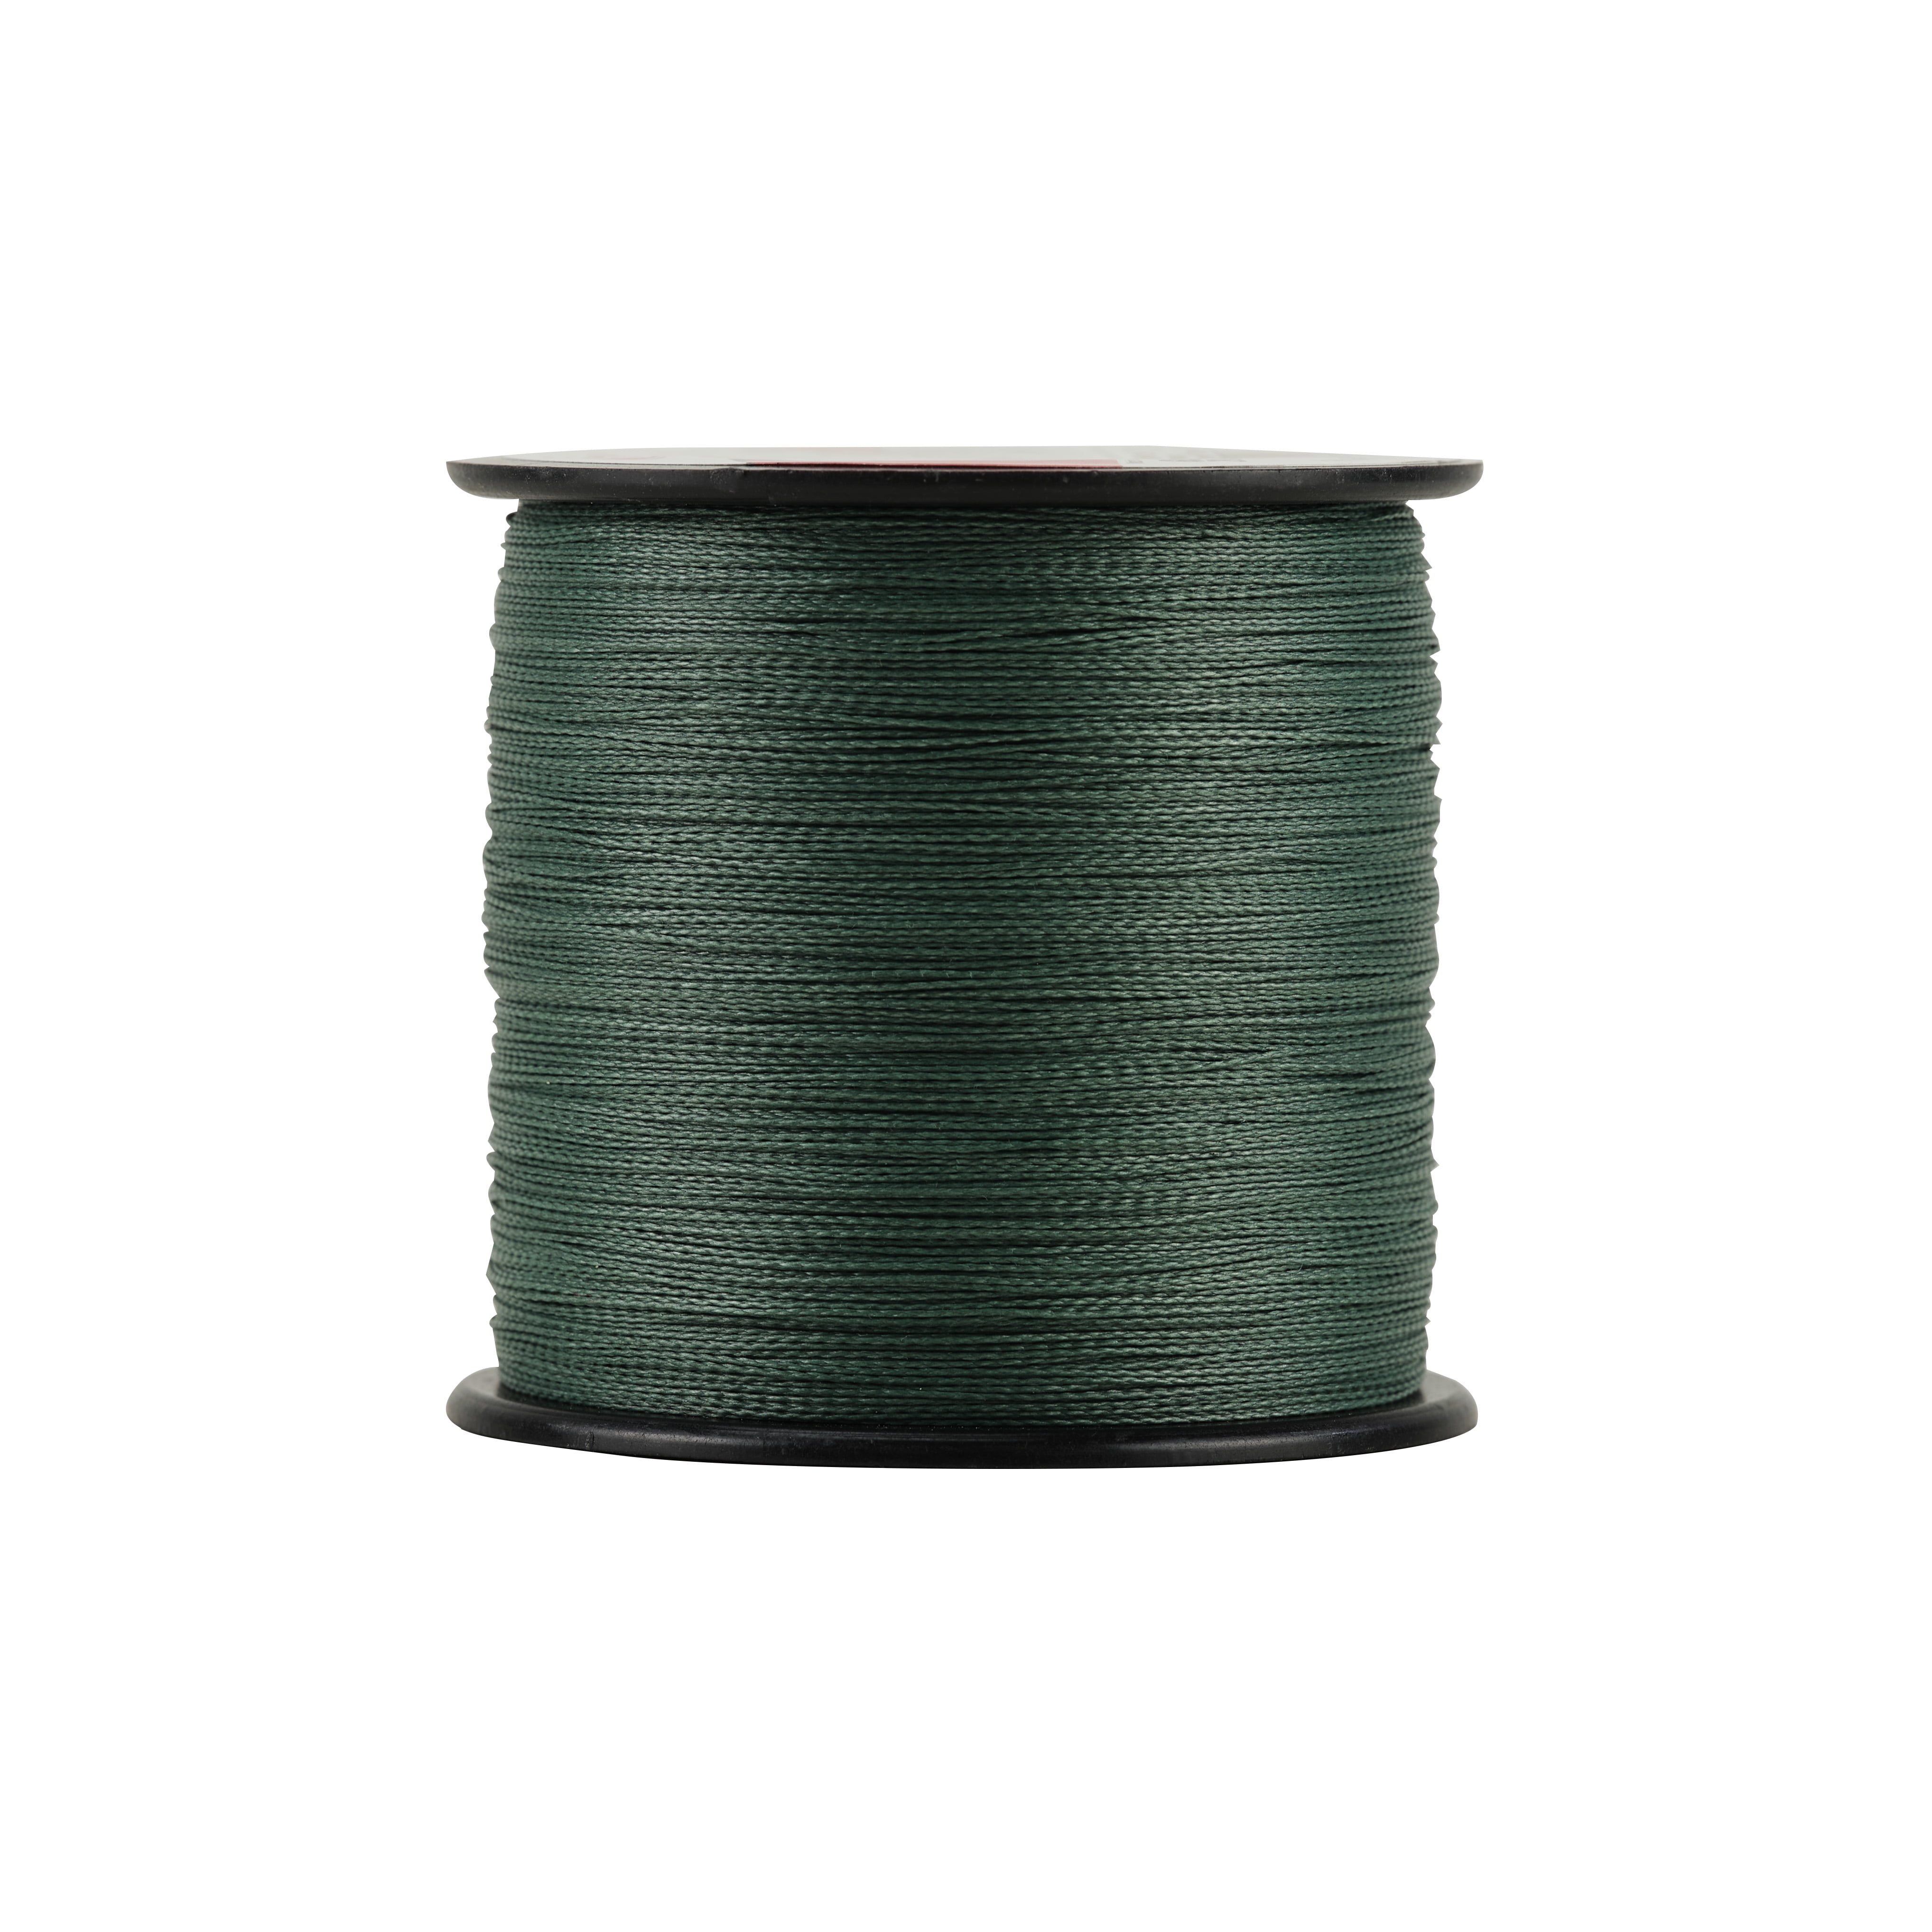 Berkley Micro PE Colored X8 Braided Line, 100 Mt, 5 Colours, at Rs  1240.00, Fishing Line